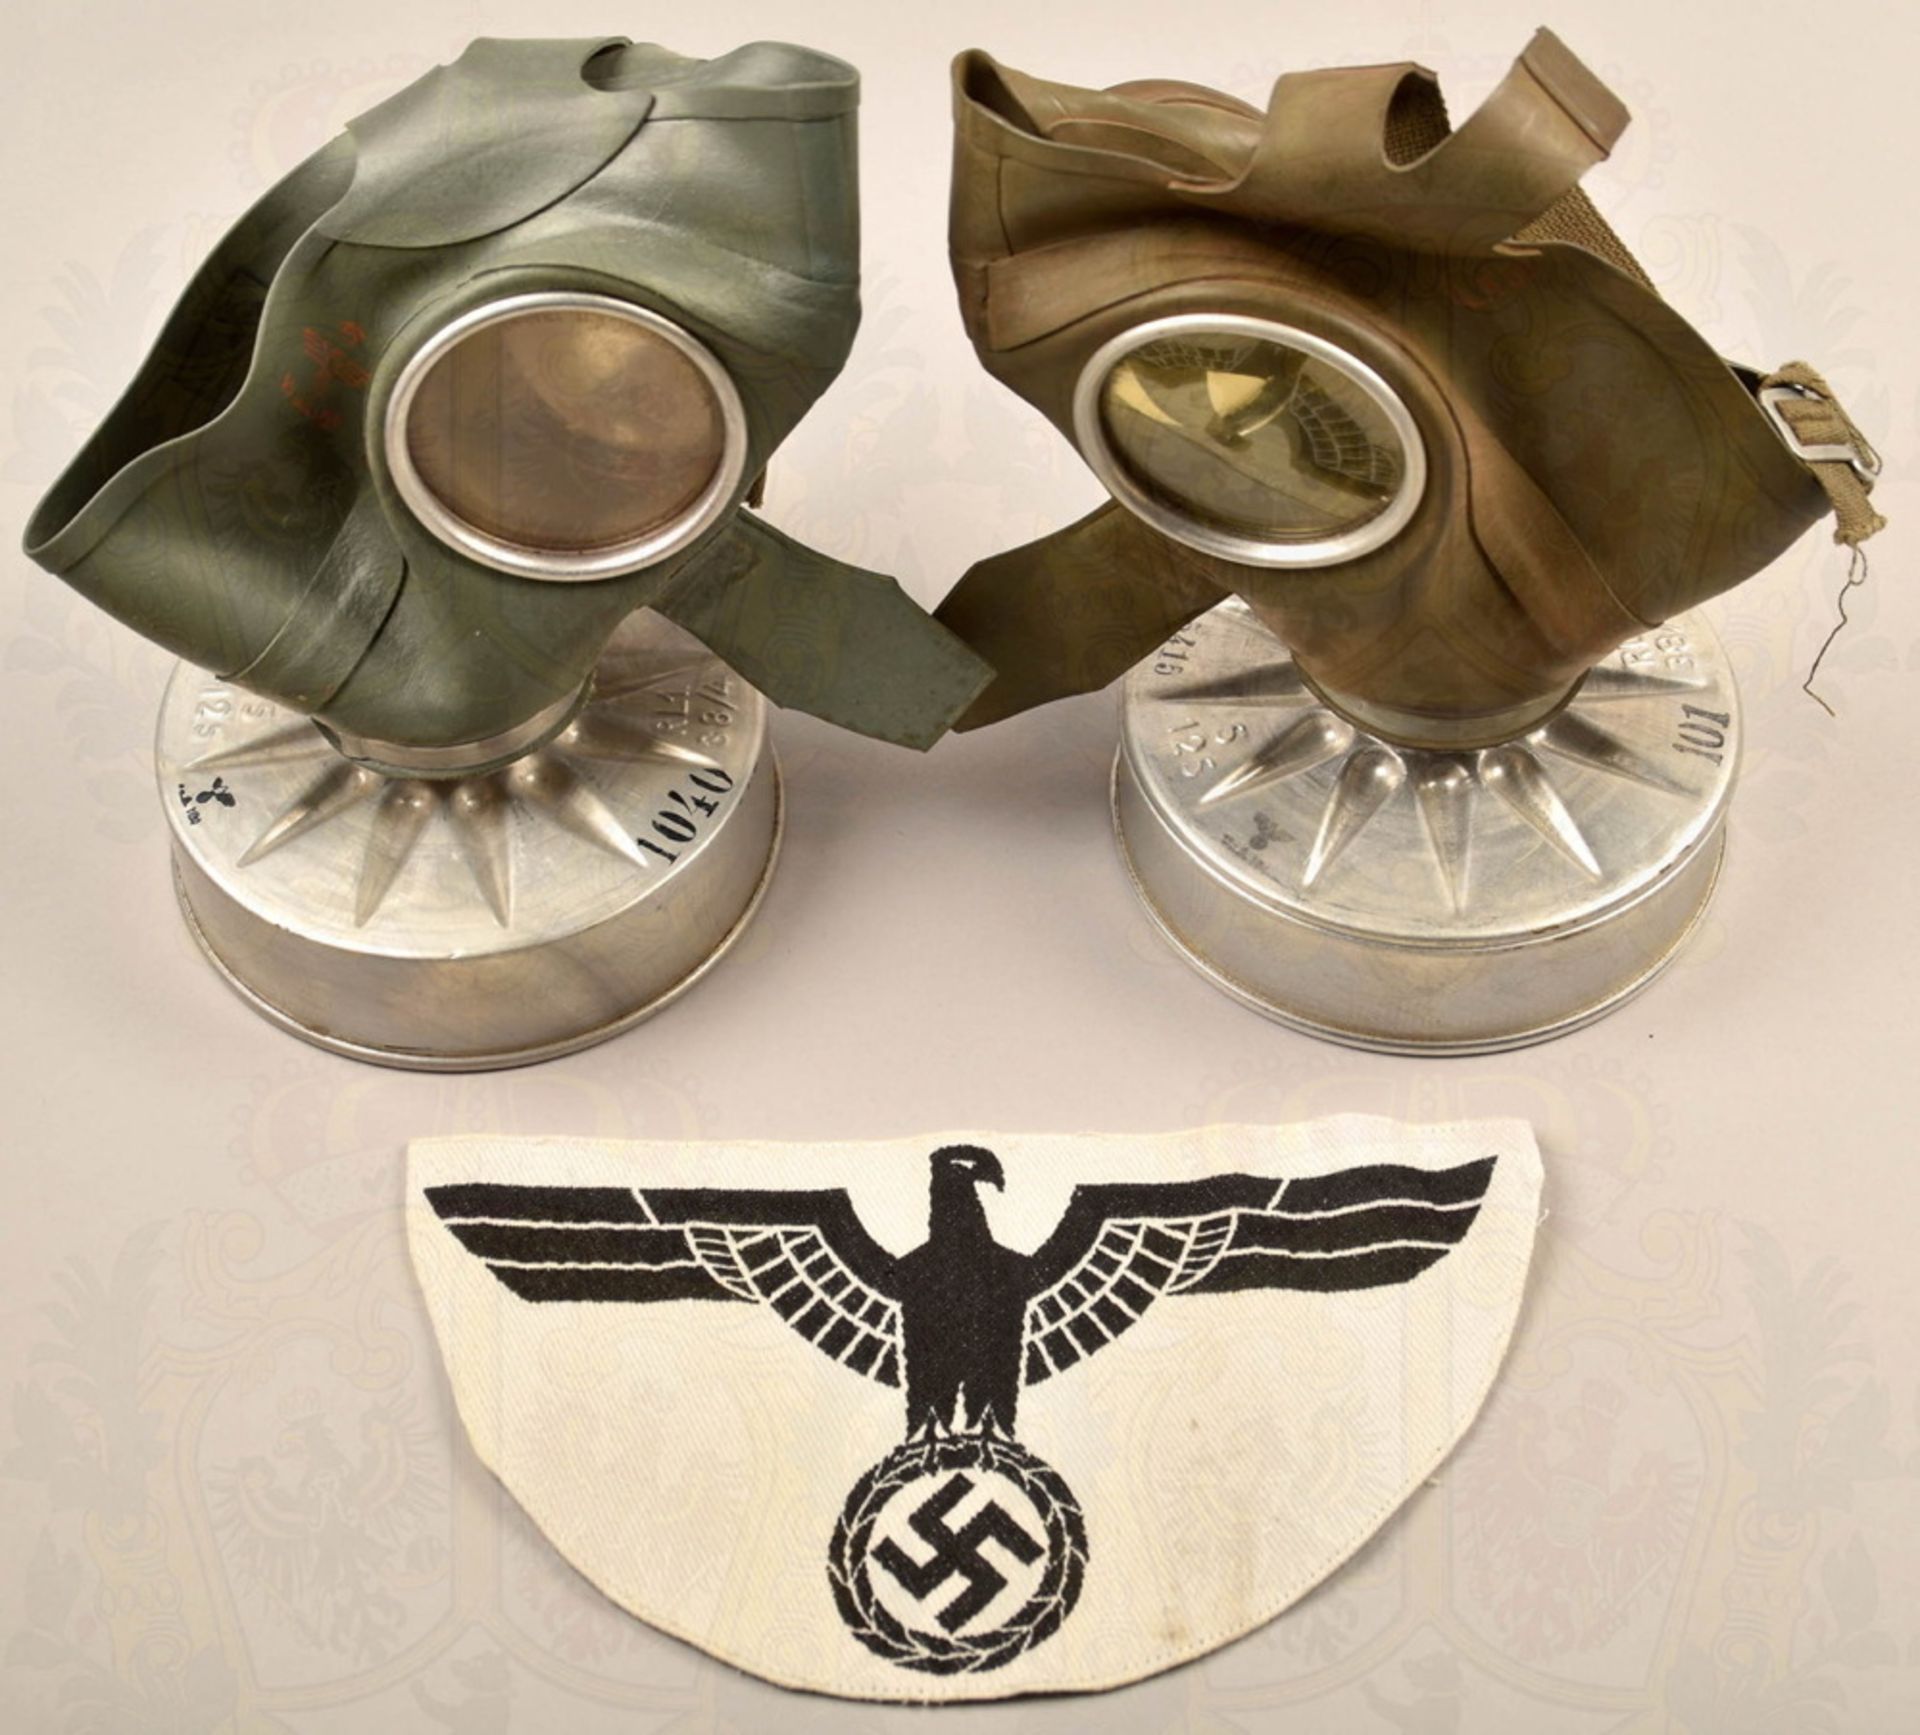 2 gas masks of 1940 and 1 Wehrmacht sports shirt eagle - Image 2 of 3